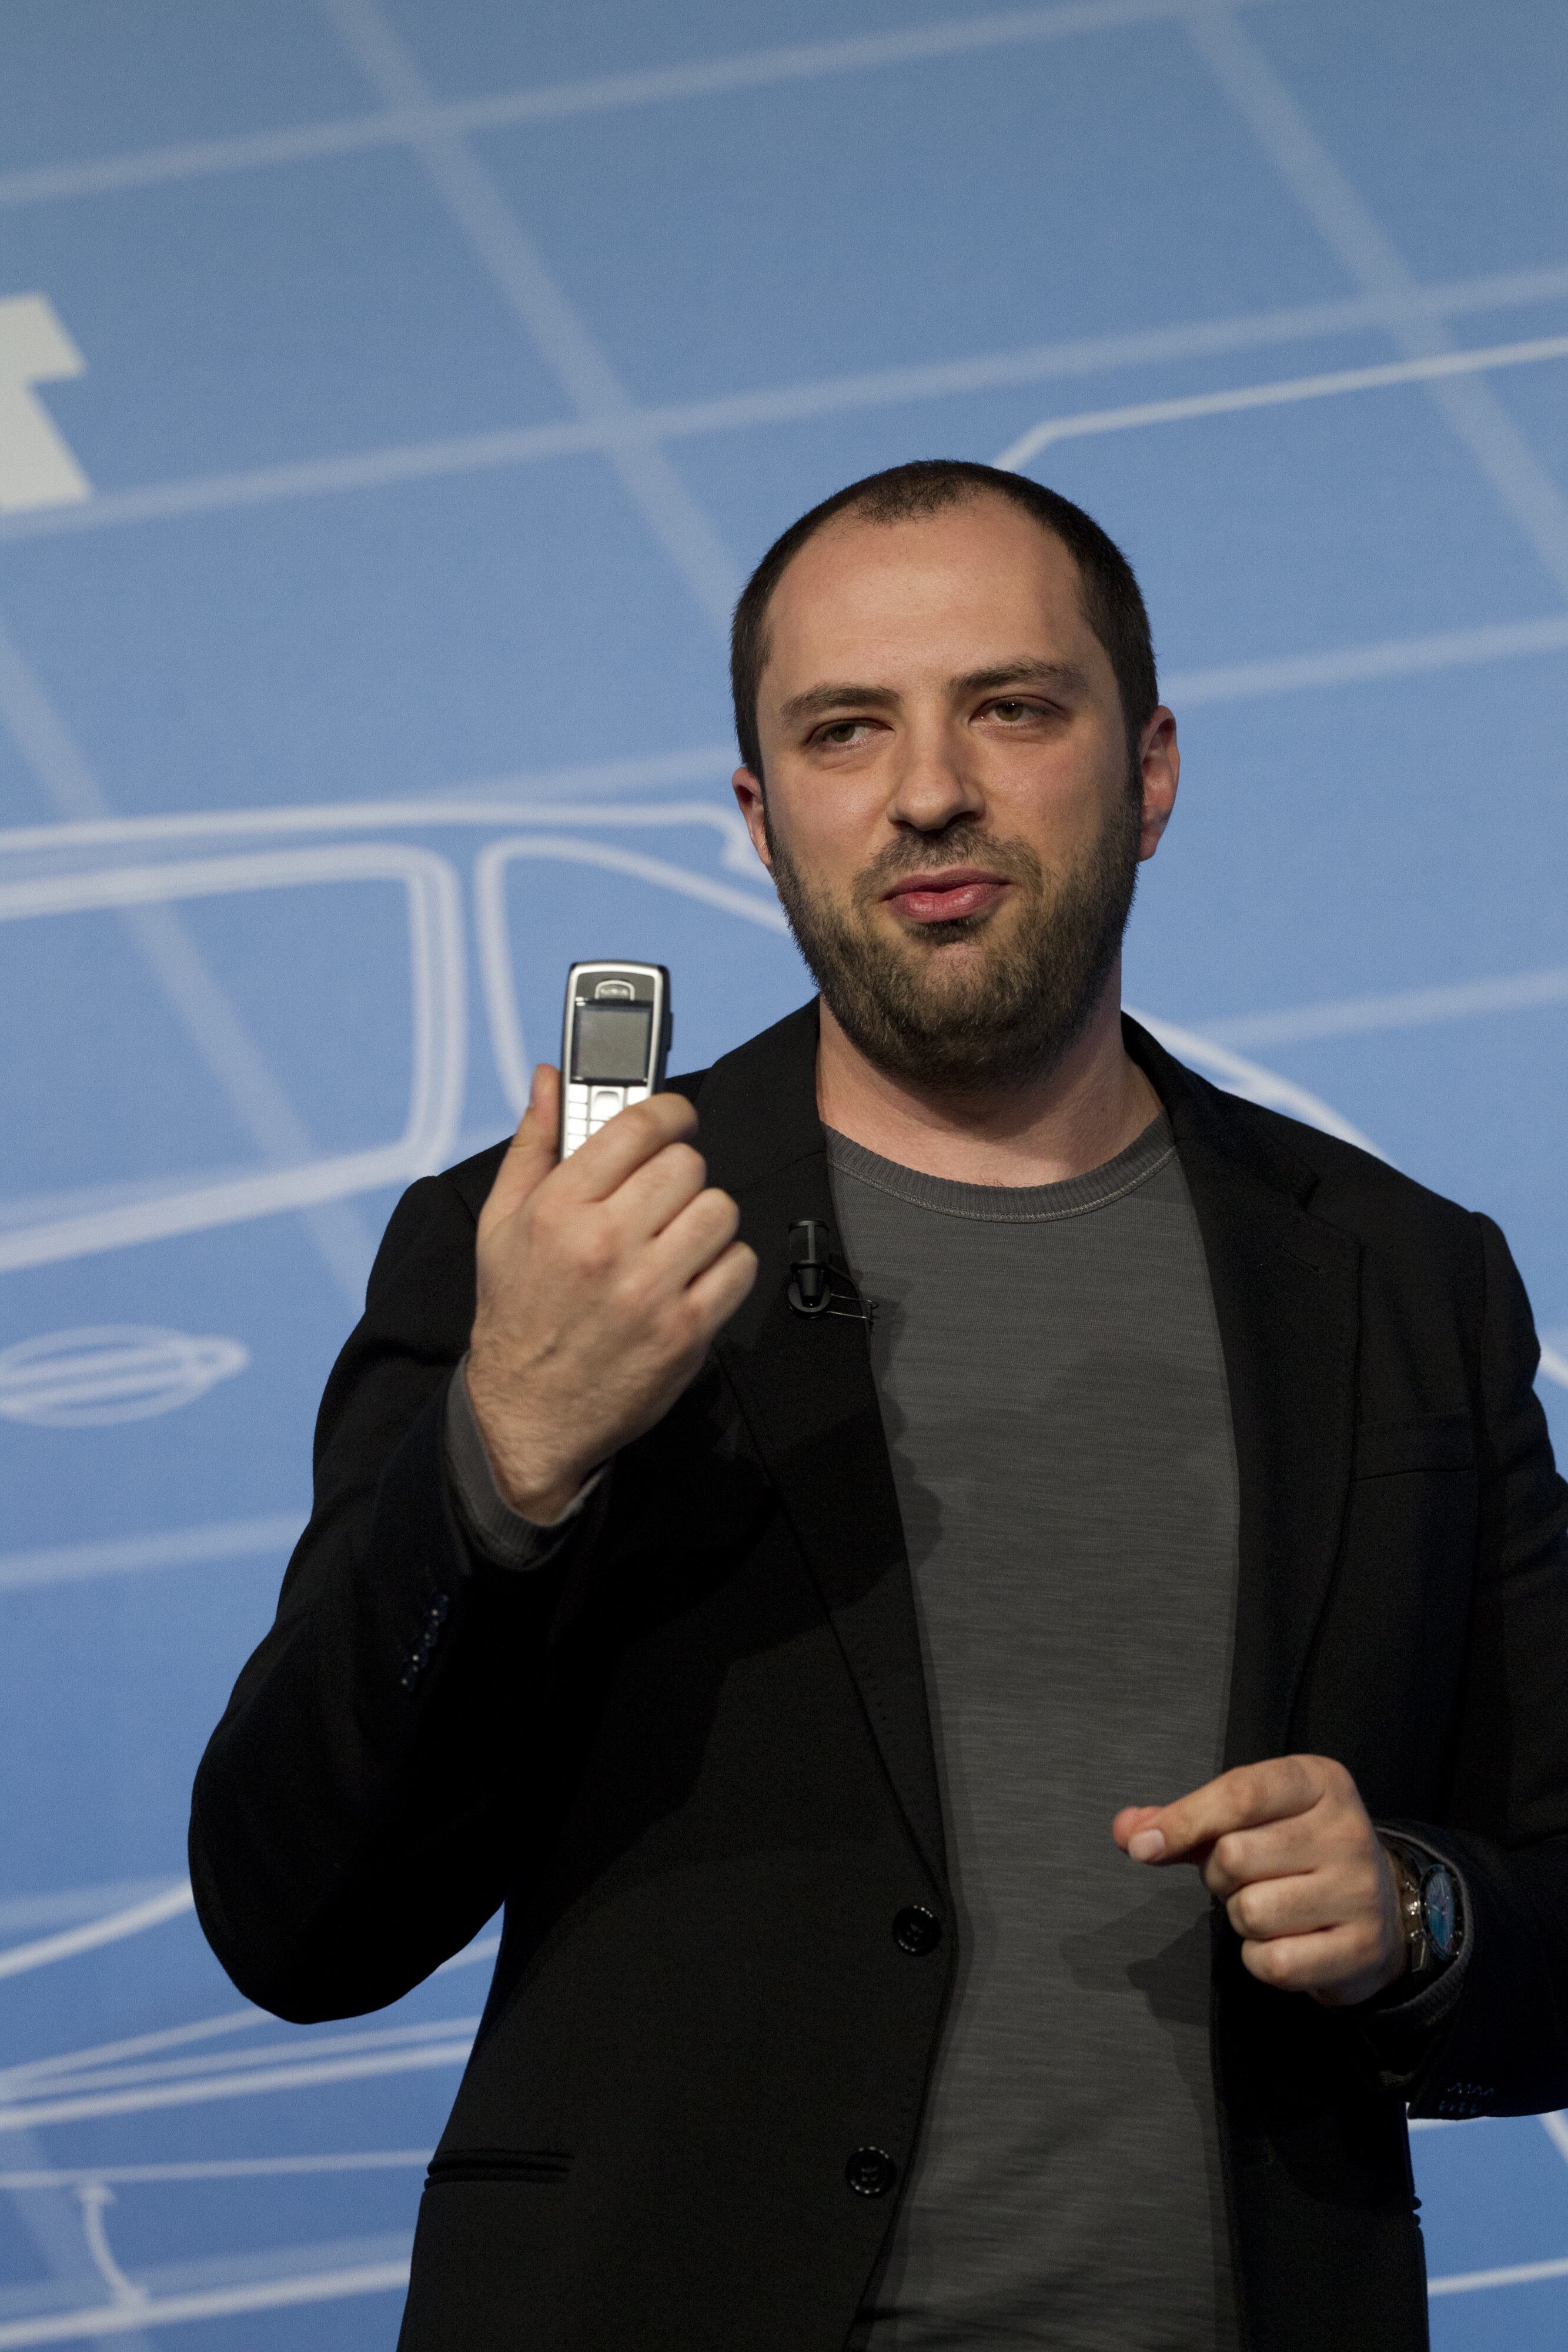 WhatsApp CEO Jan Koum shows off his personal phone at Mobile World Congress in Barcelona on February 24, 2014 (Angel Navarette / Bloomberg / Getty Images)